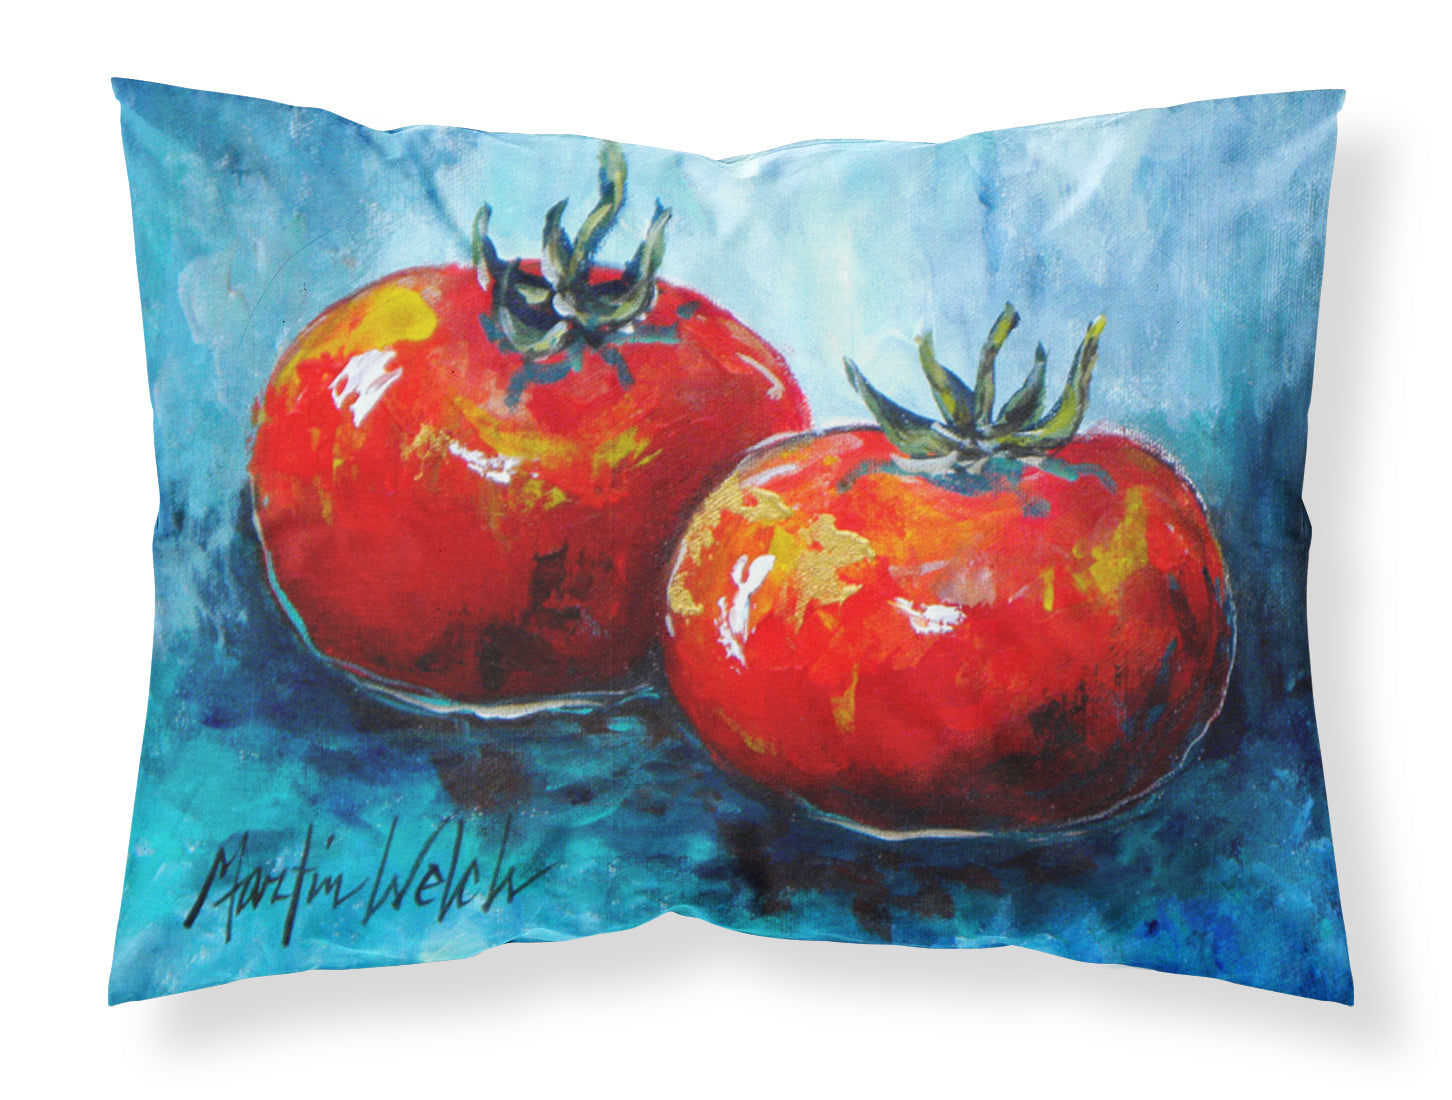 Buy this Vegetables - Tomatoes Red Toes Fabric Standard Pillowcase